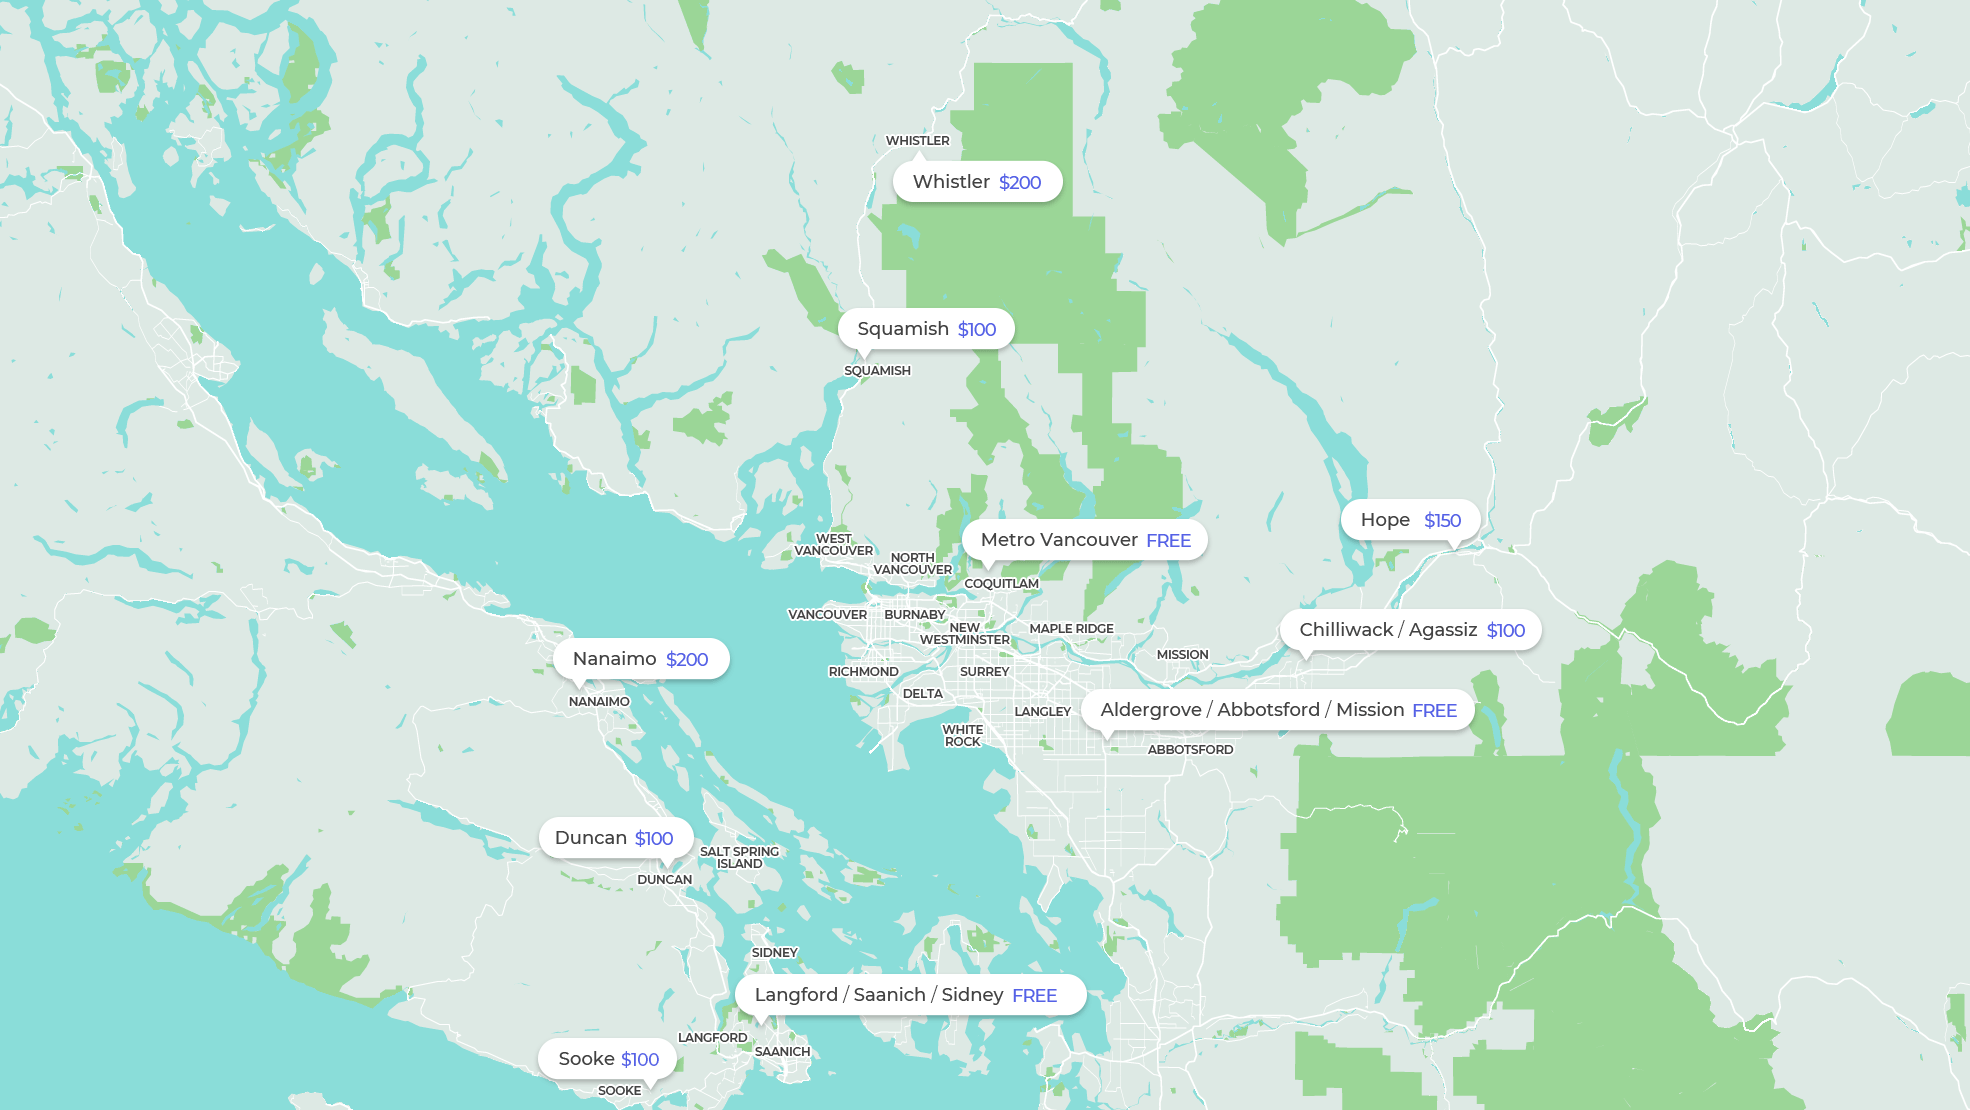 vancouver-area-travel-cost-map